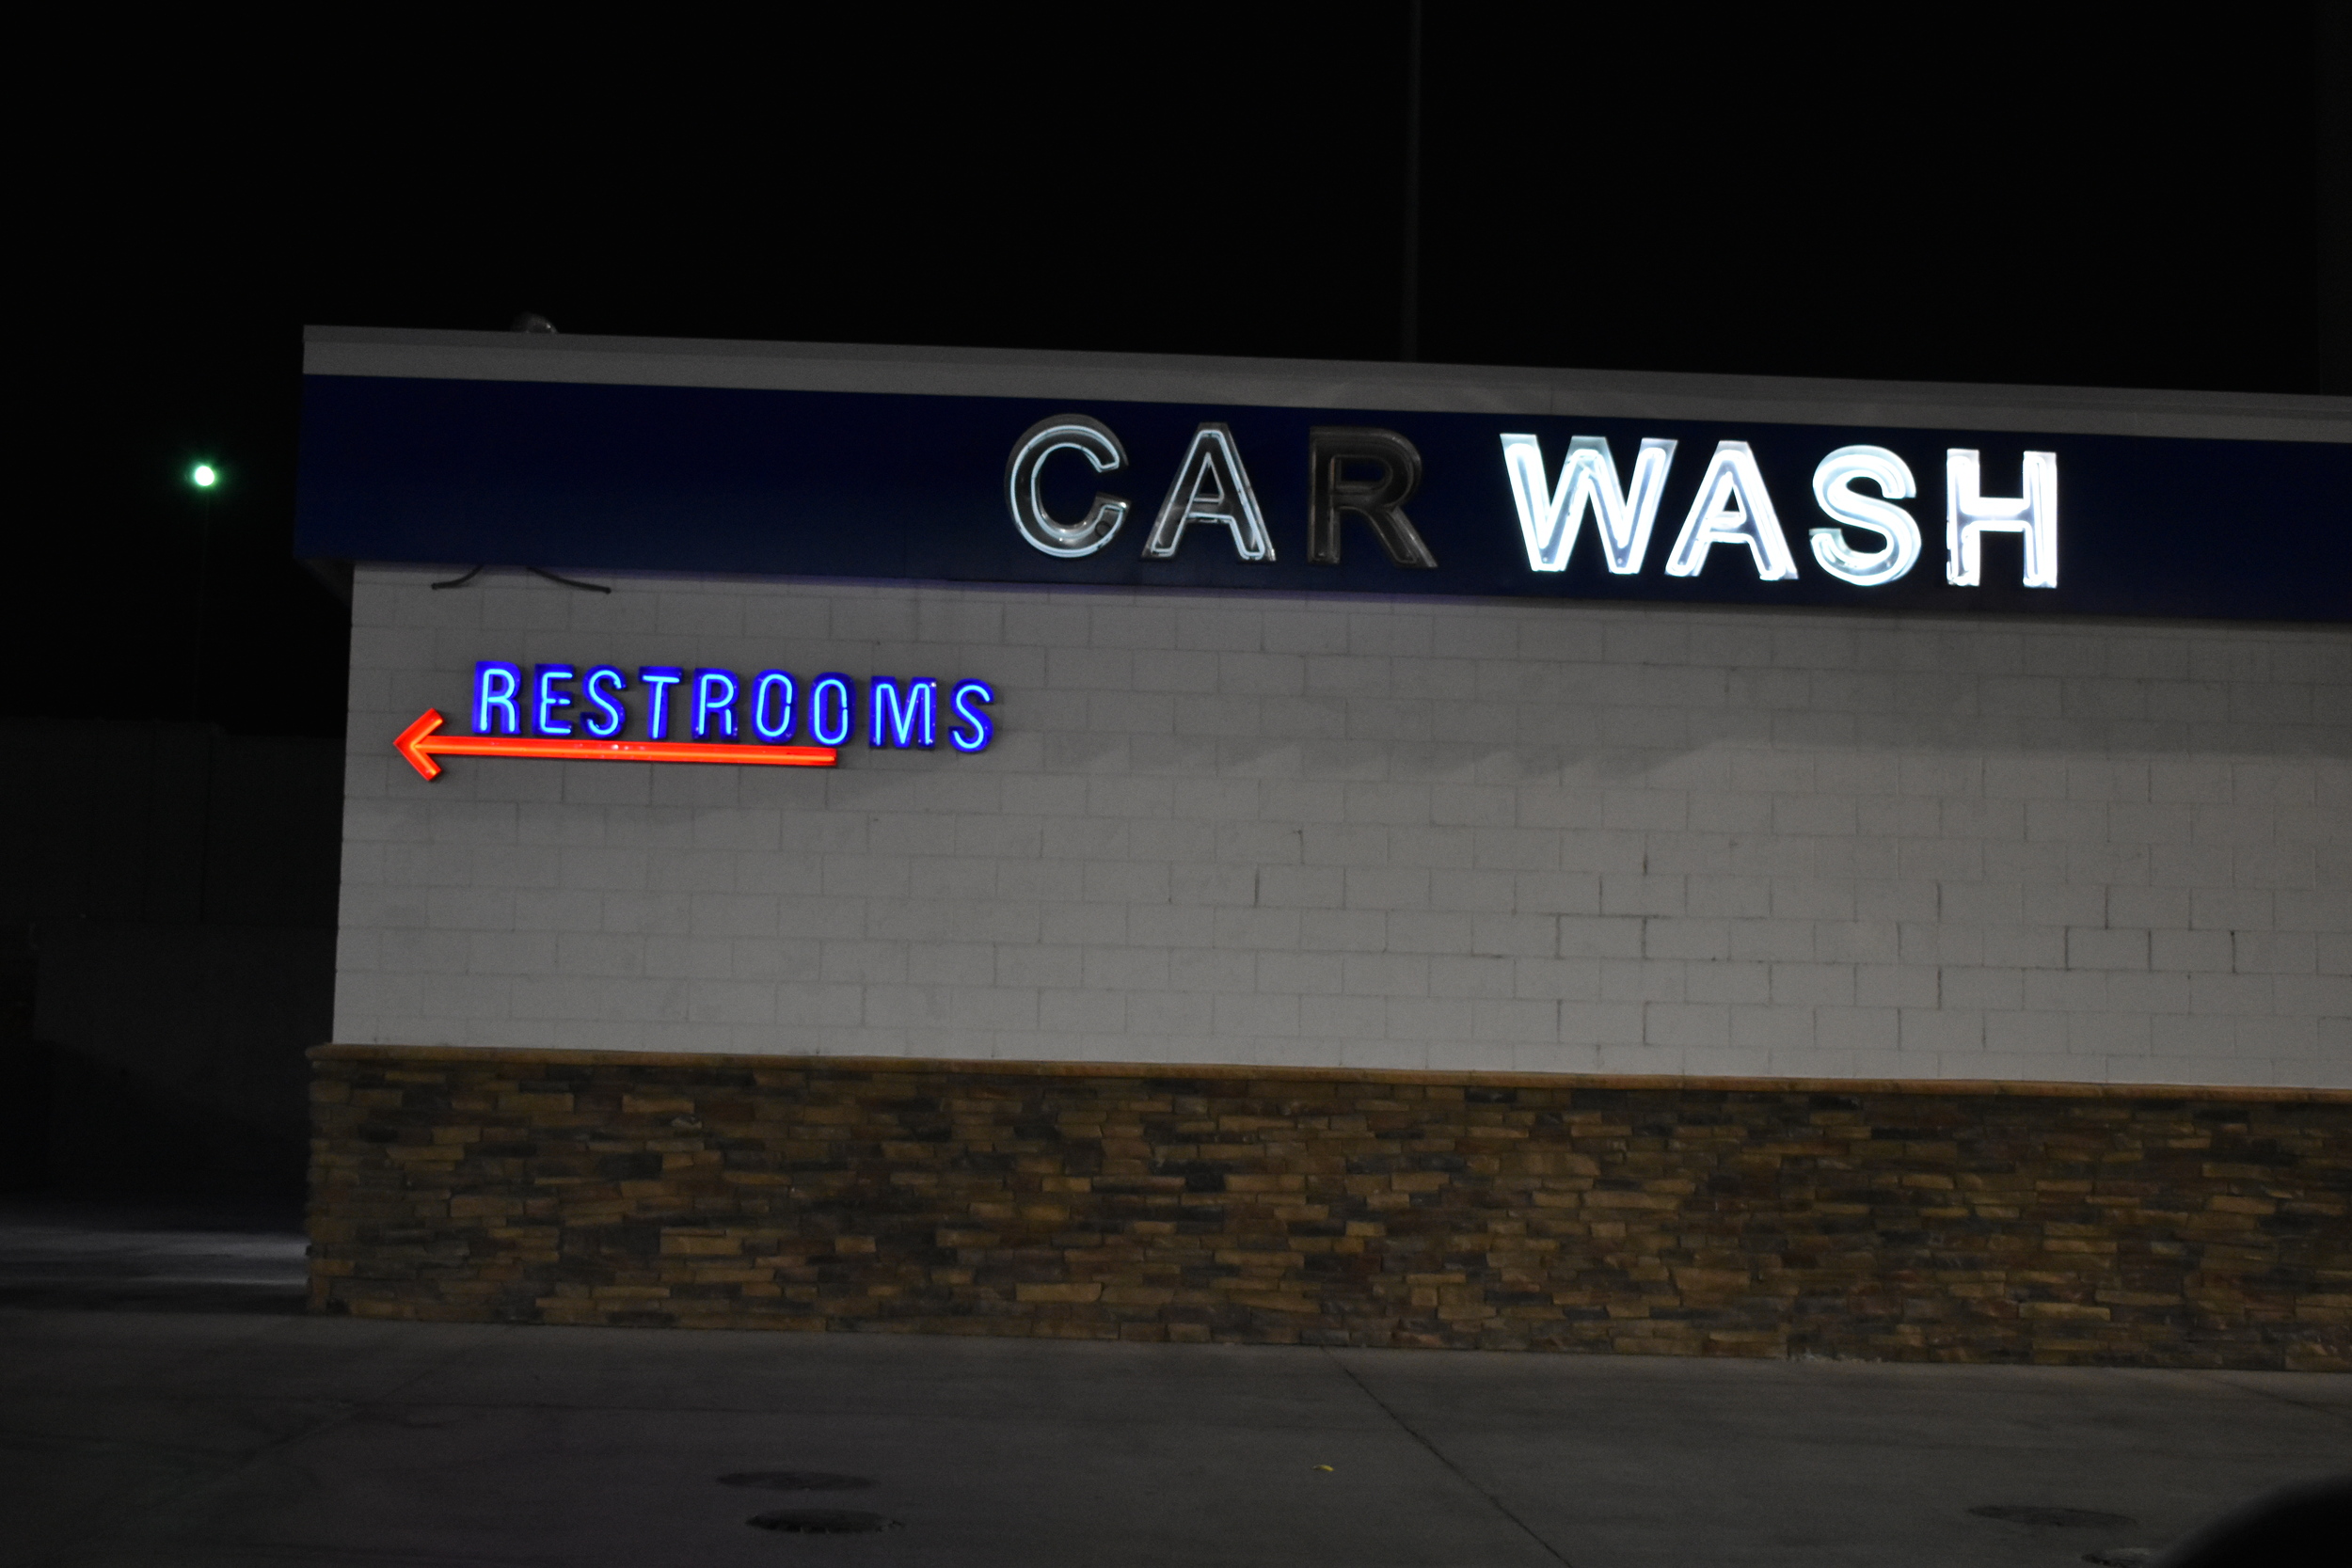 Car Wash and restroom wall mounted sign, Wendover, Nevada